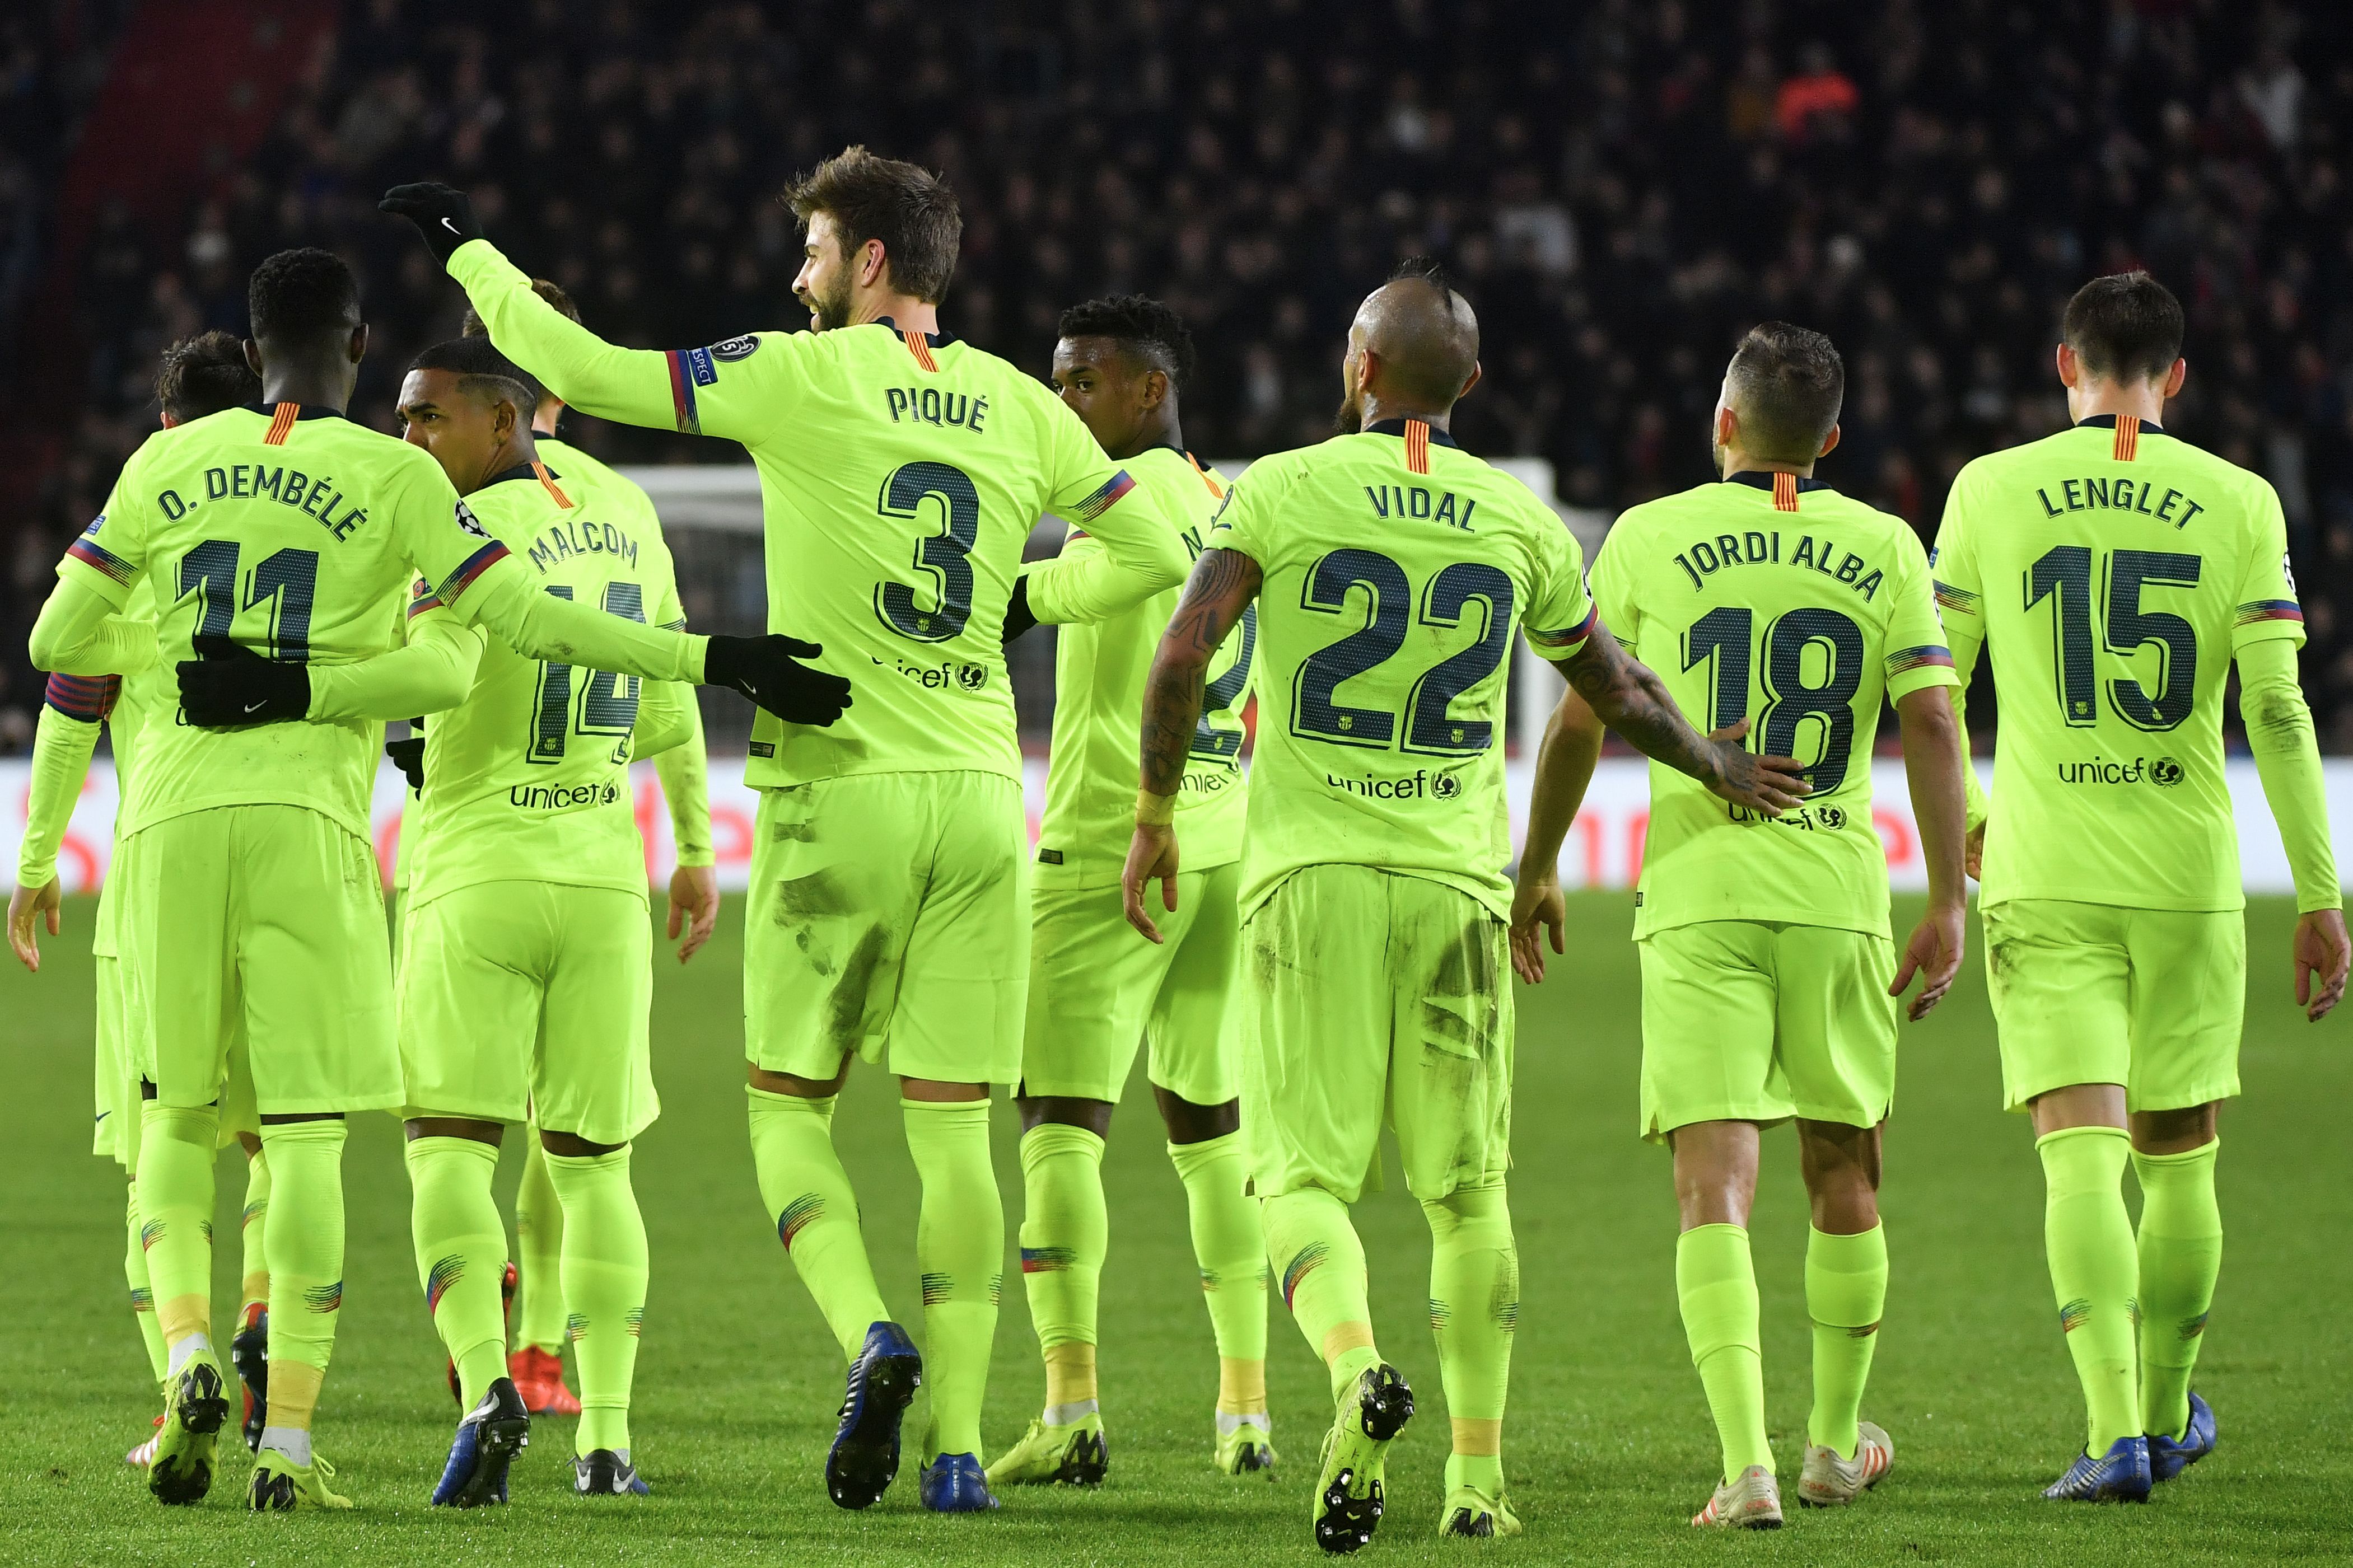 Barcelona's Spanish defender Gerard Pique (3rdL) celebrates with his teammates after scoring during the UEFA Champions League football match between PSV Eindhoven and FC Barcelona at Philips stadium in Eindhoven on November 28, 2018. (Photo by EMMANUEL DUNAND / AFP)        (Photo credit should read EMMANUEL DUNAND/AFP/Getty Images)